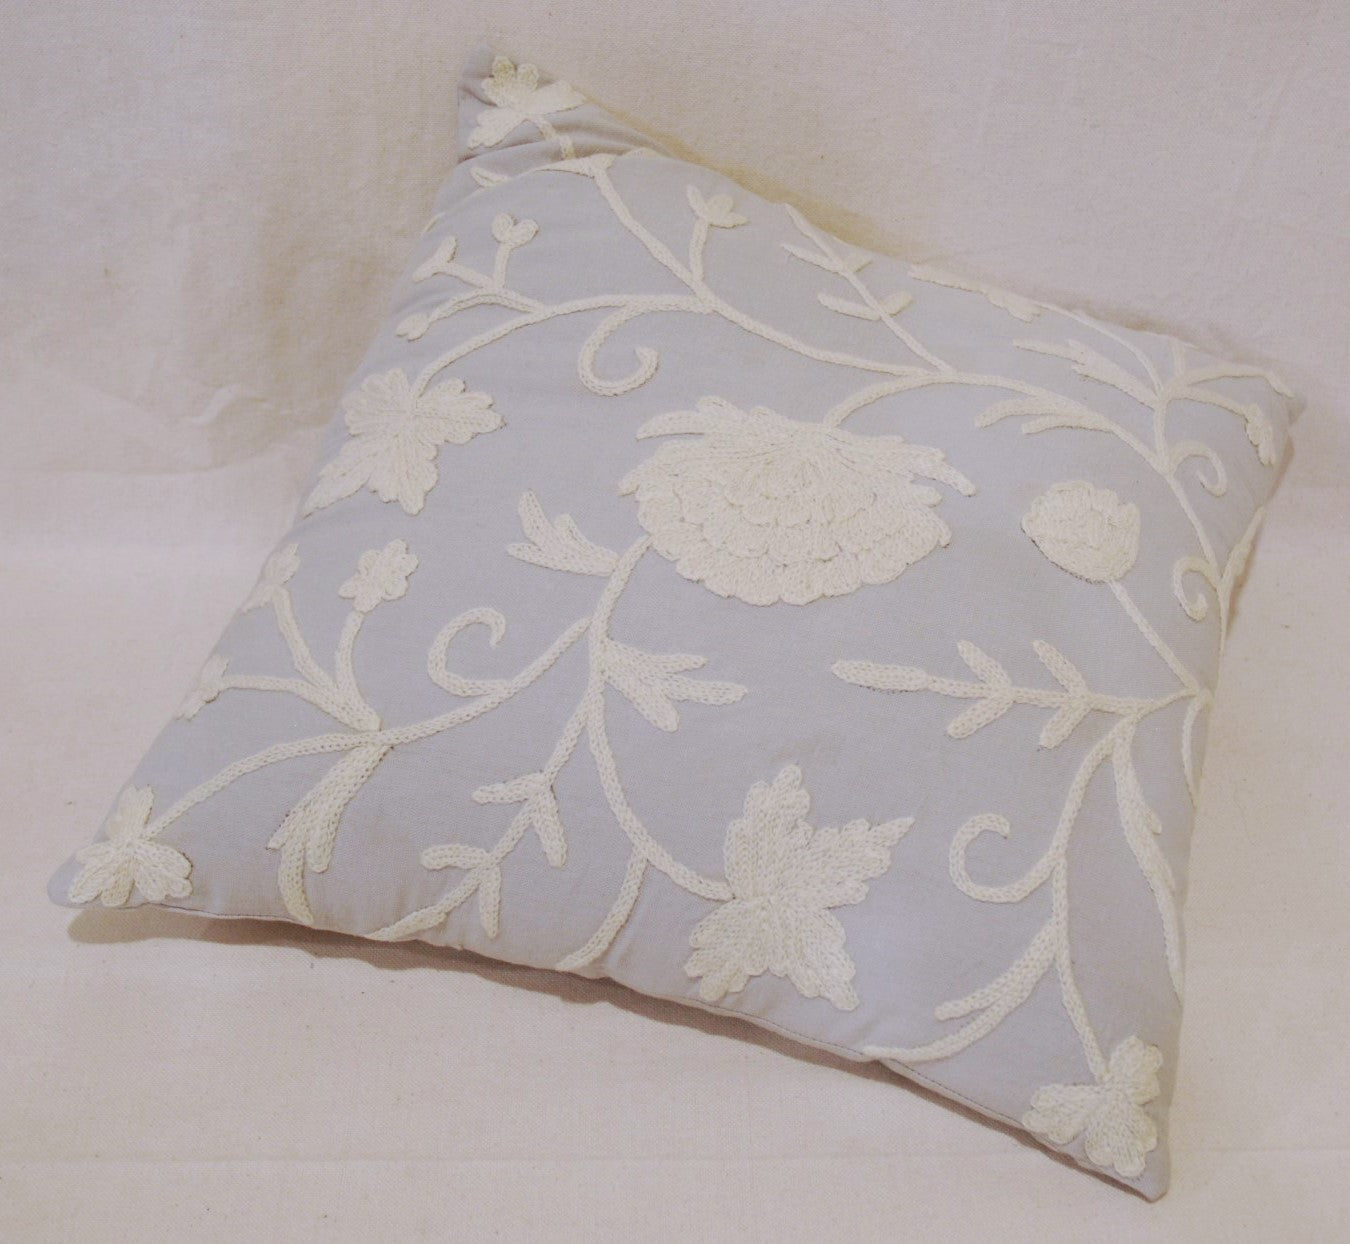 Crewel Embroidery Throw Pillowcase, Cushion Cover Floral, White on Grey #CW341